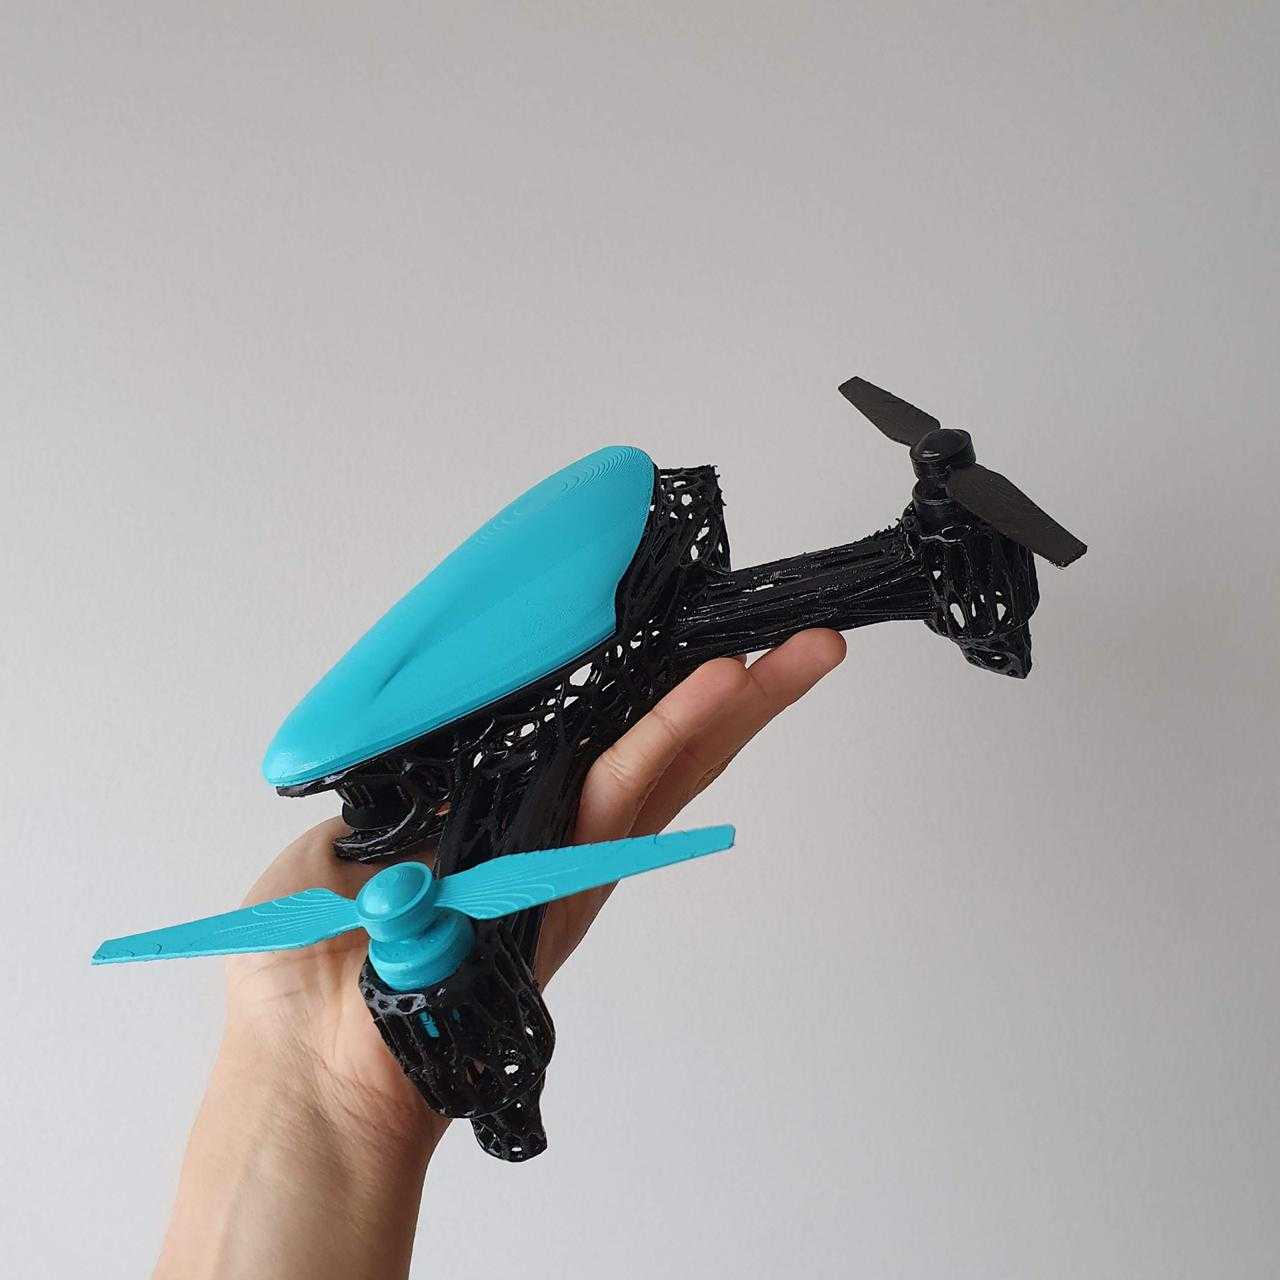 Picture of a drone held in a hand